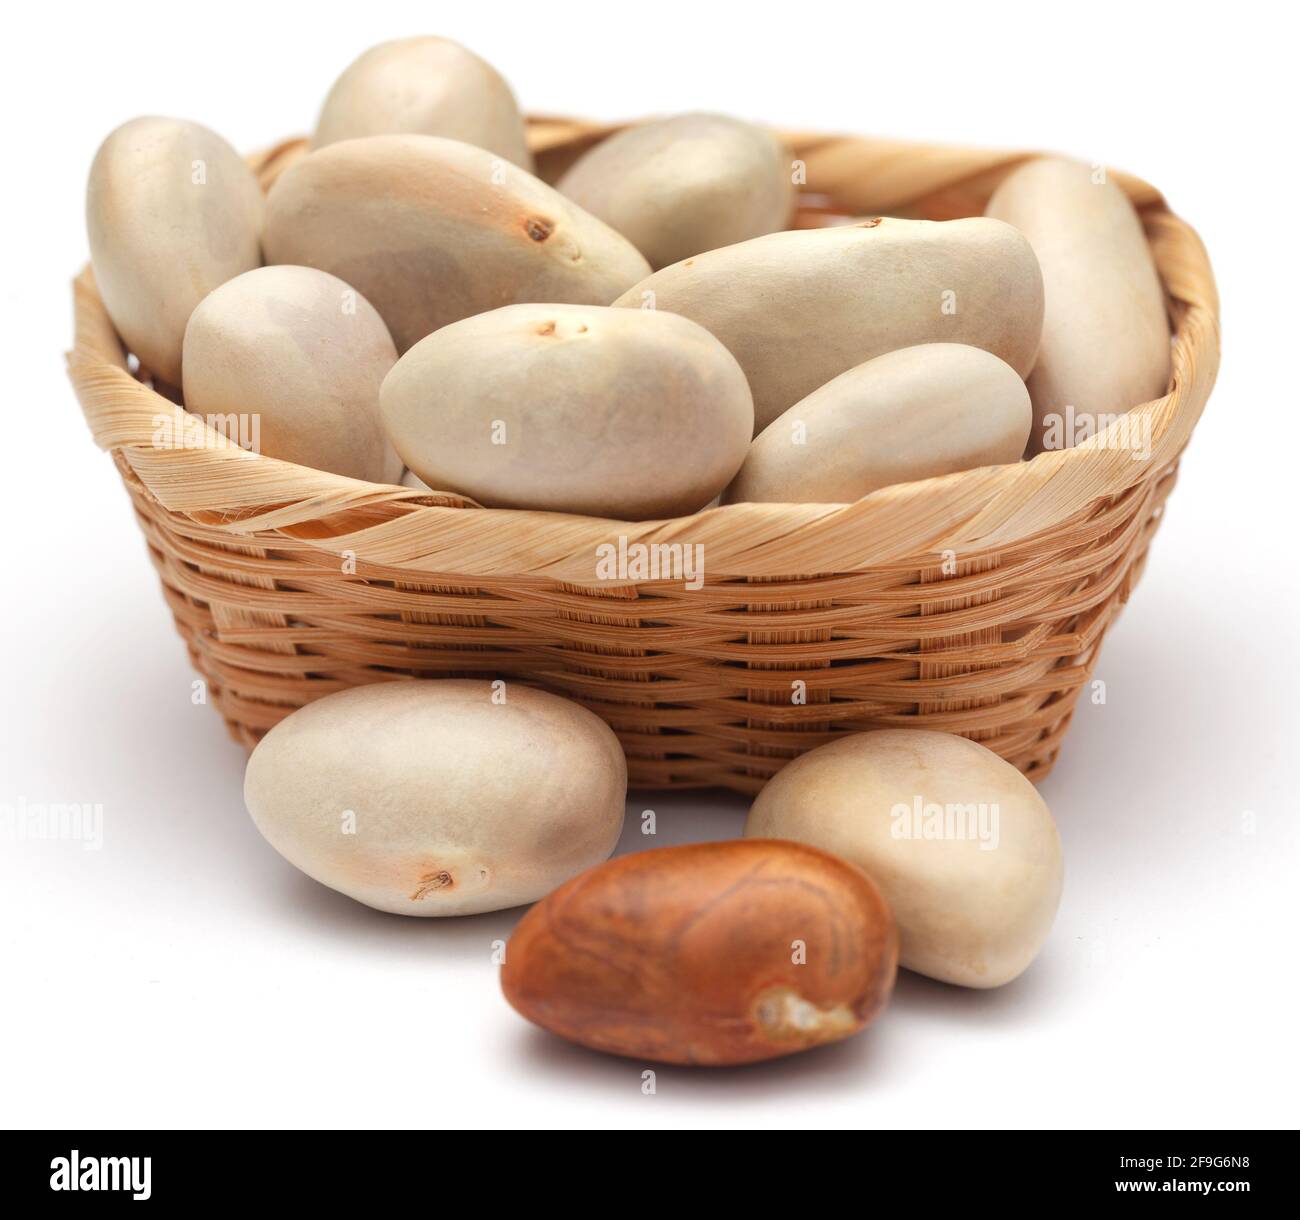 Edible seeds of jackfruit in a basket over white Stock Photo